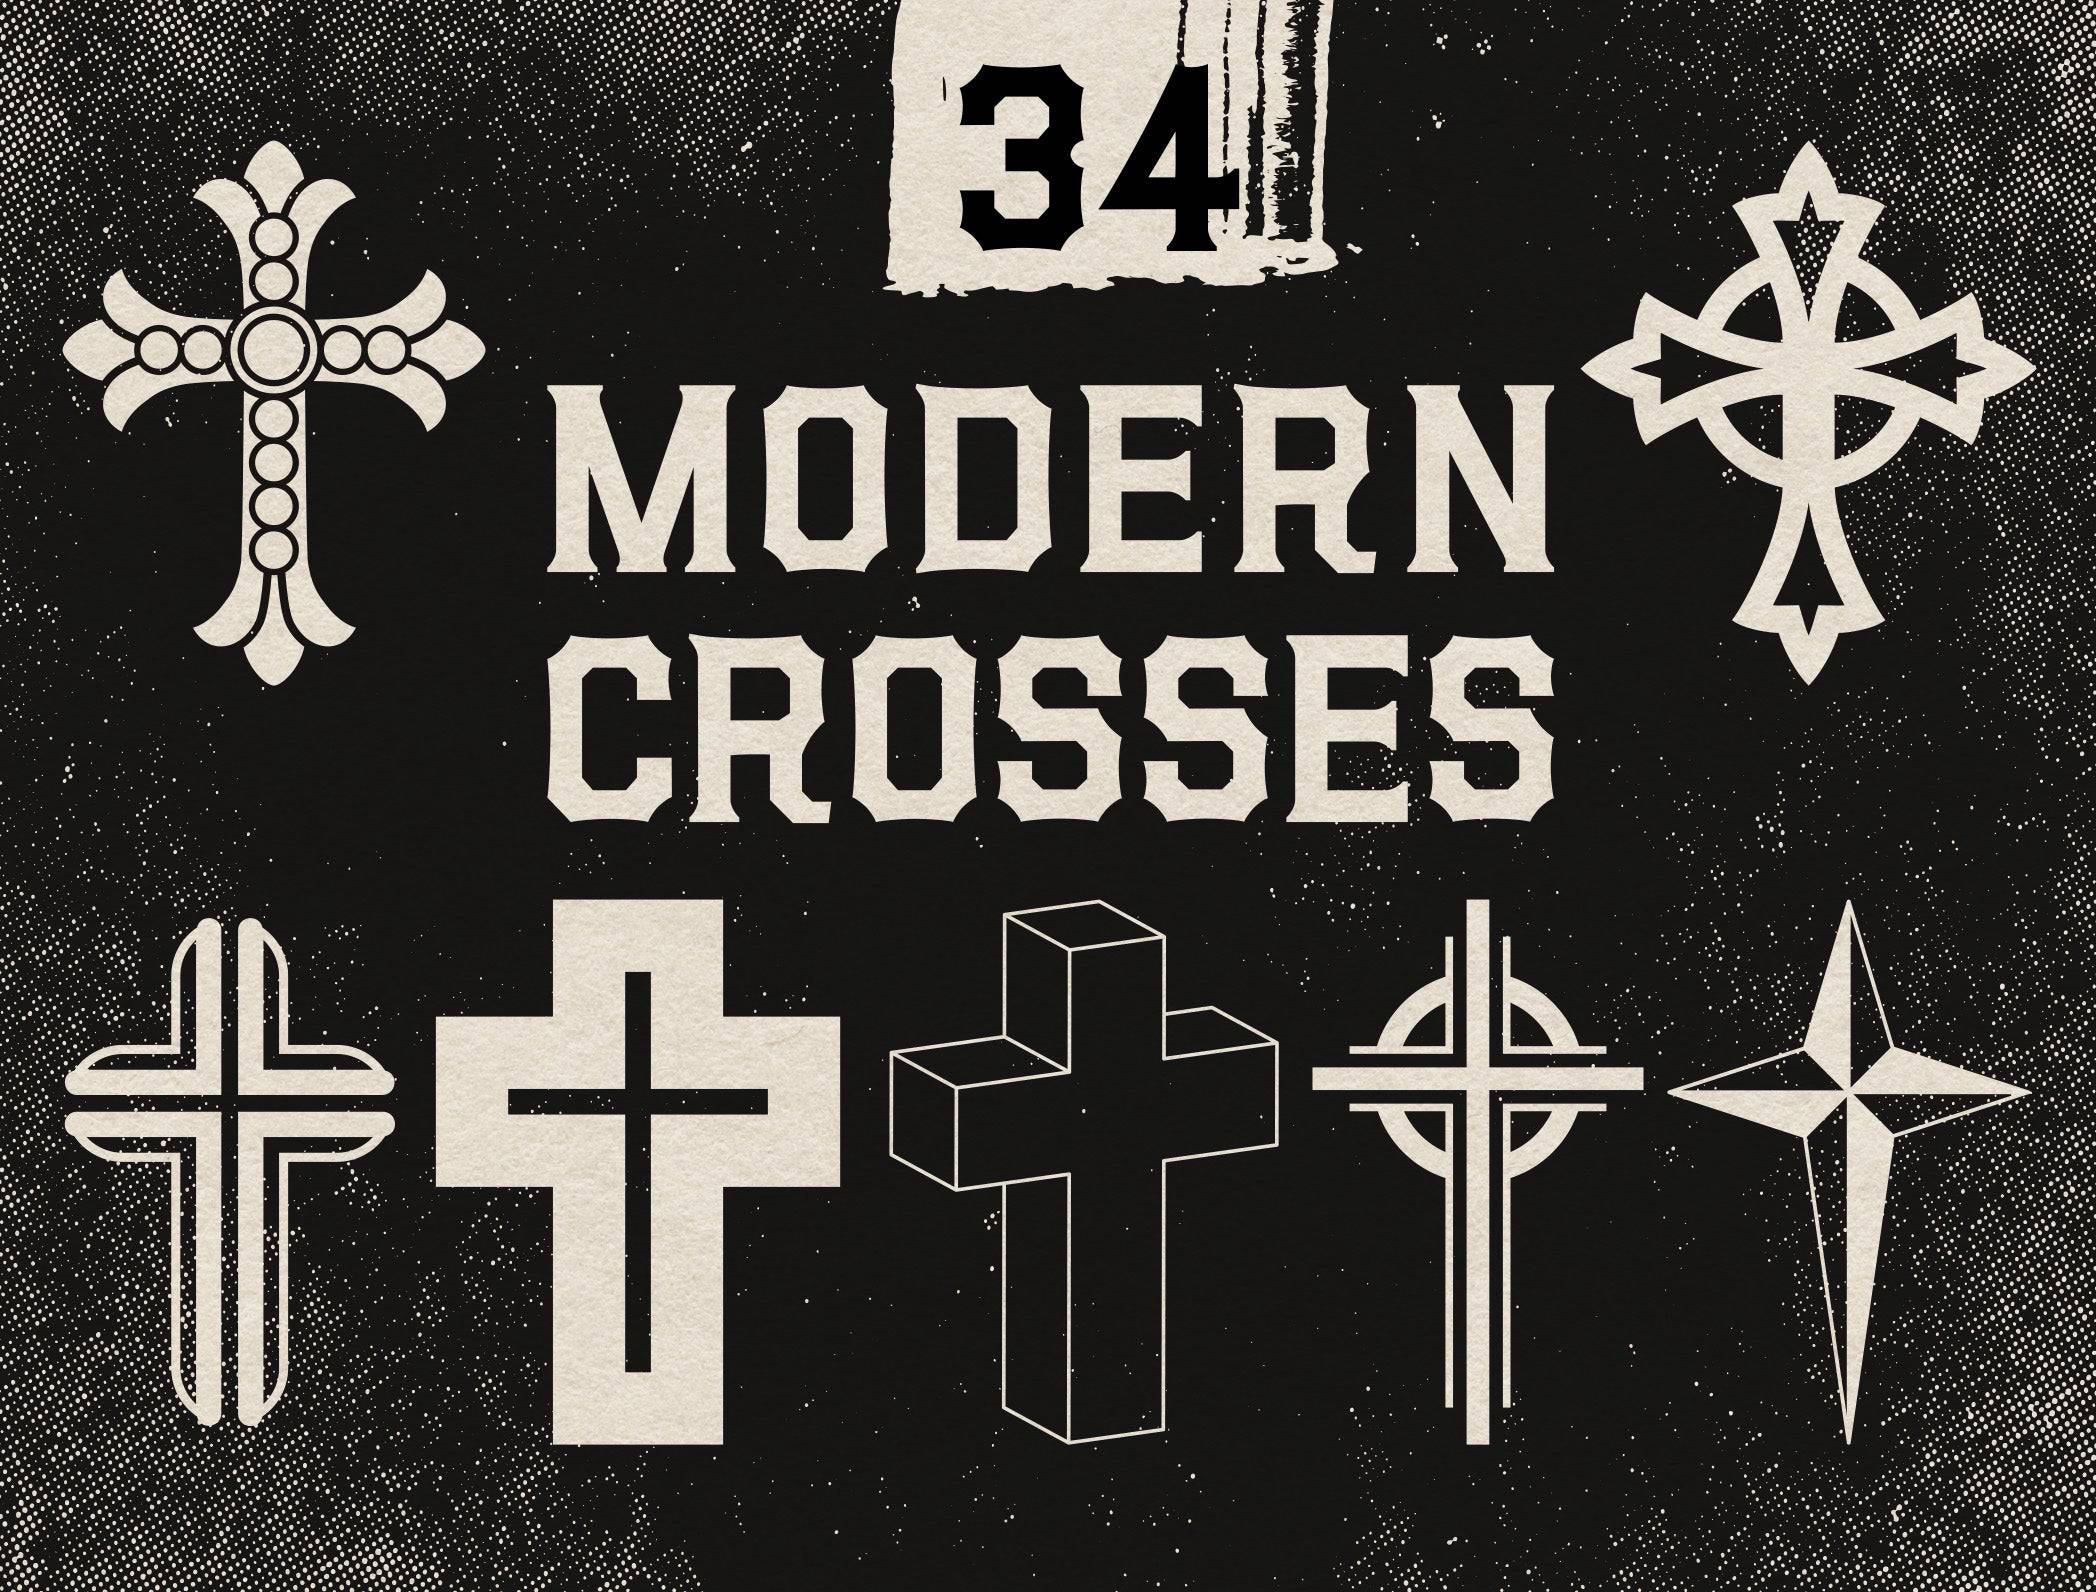 Meaning Of Cross Tattoos – Tattoo for a week